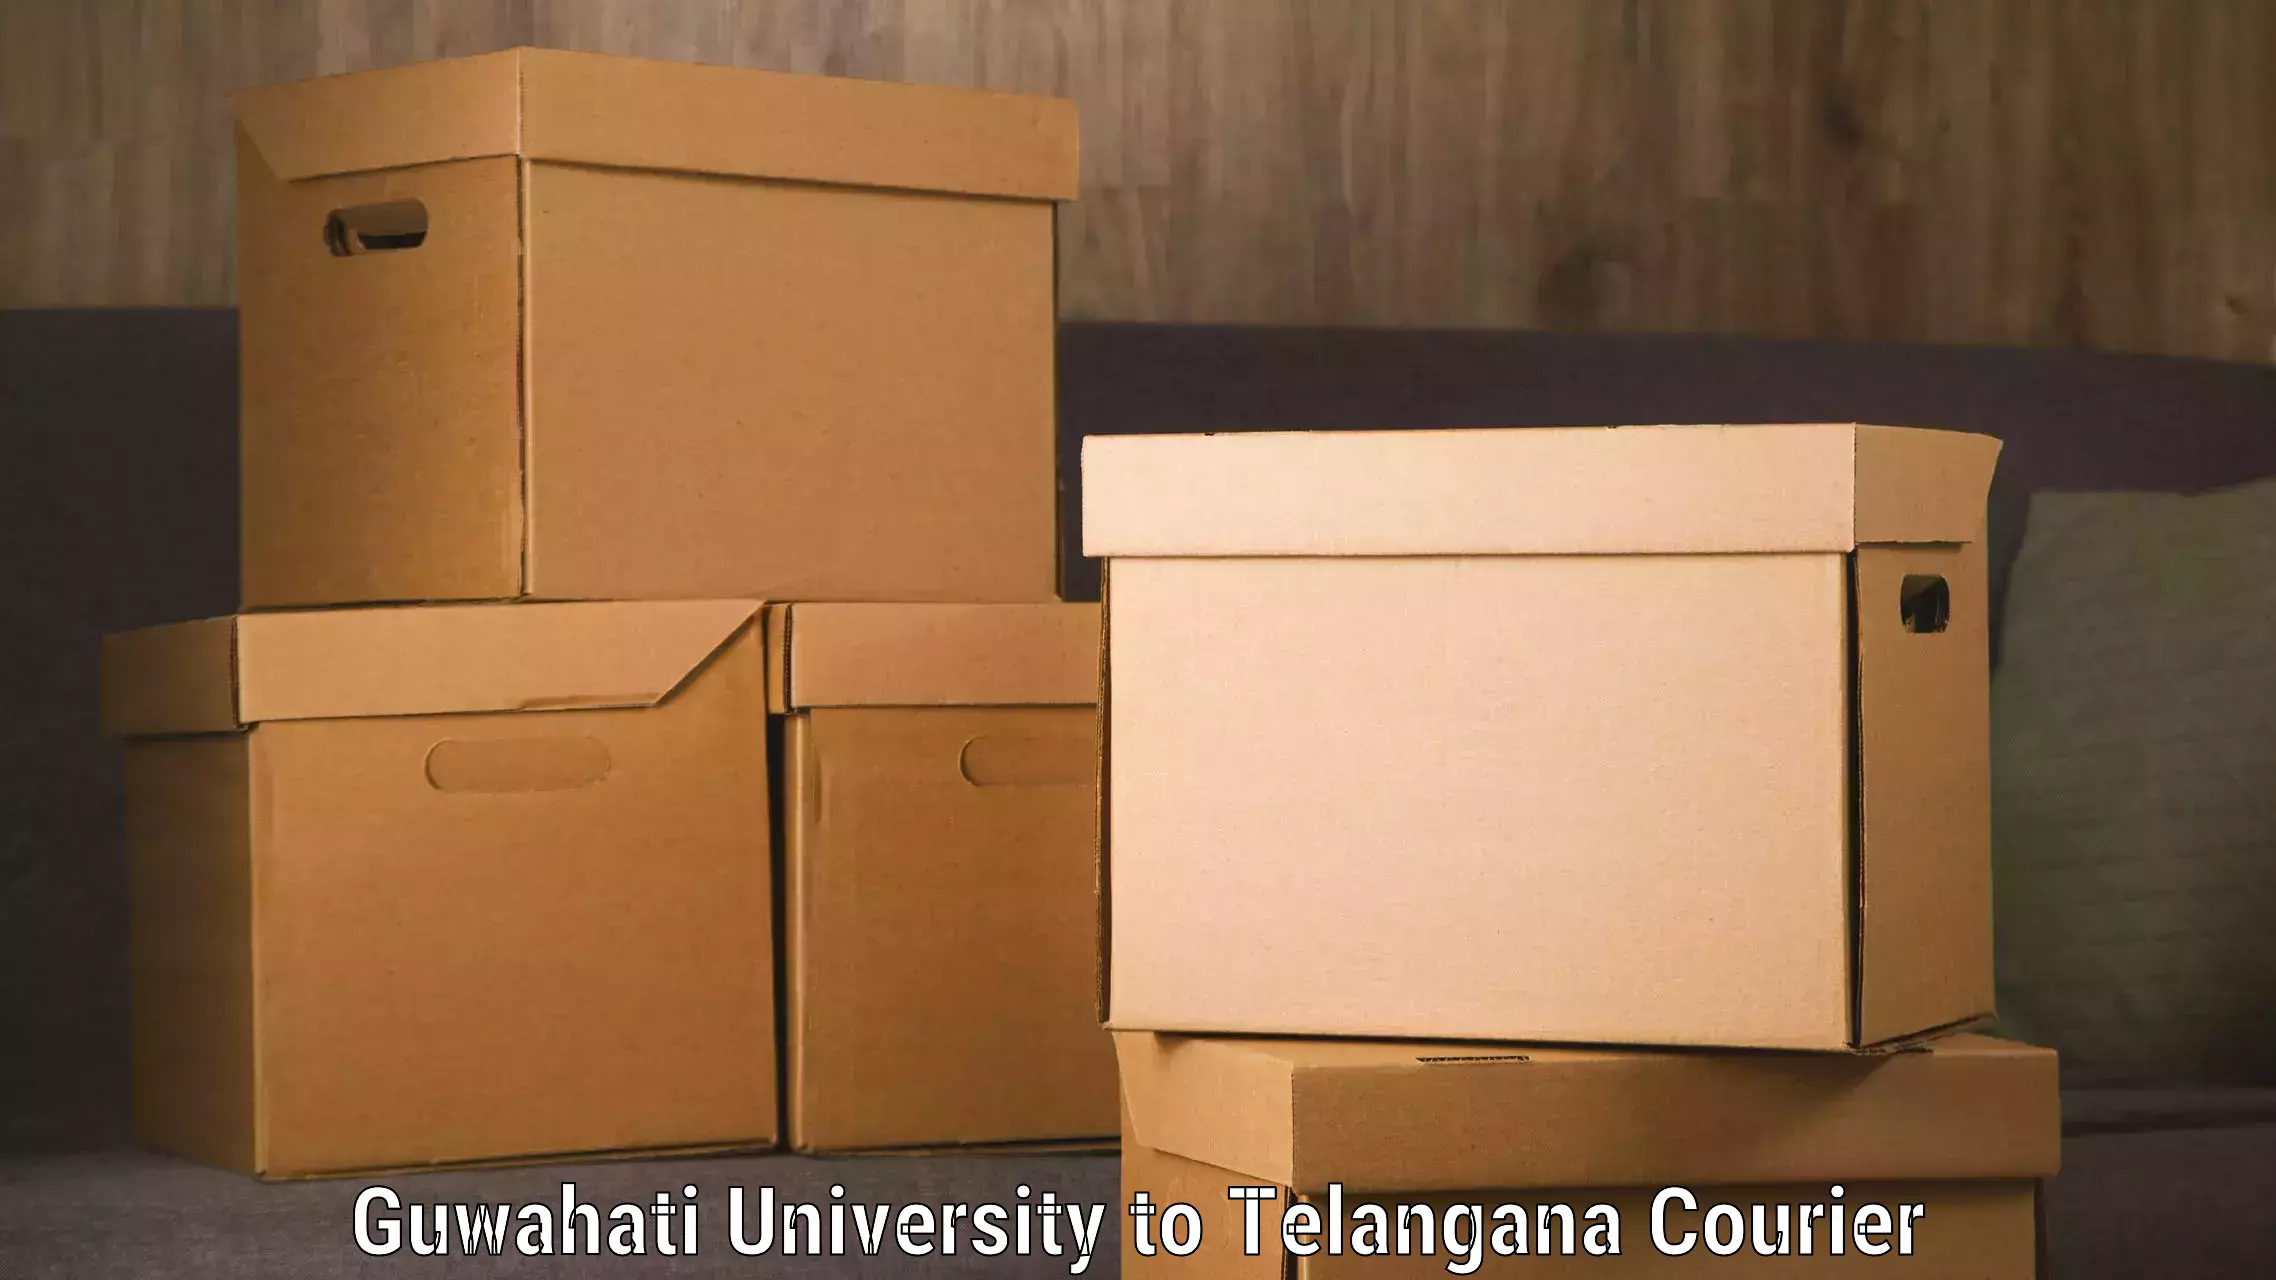 Personal luggage delivery Guwahati University to Gollapalli